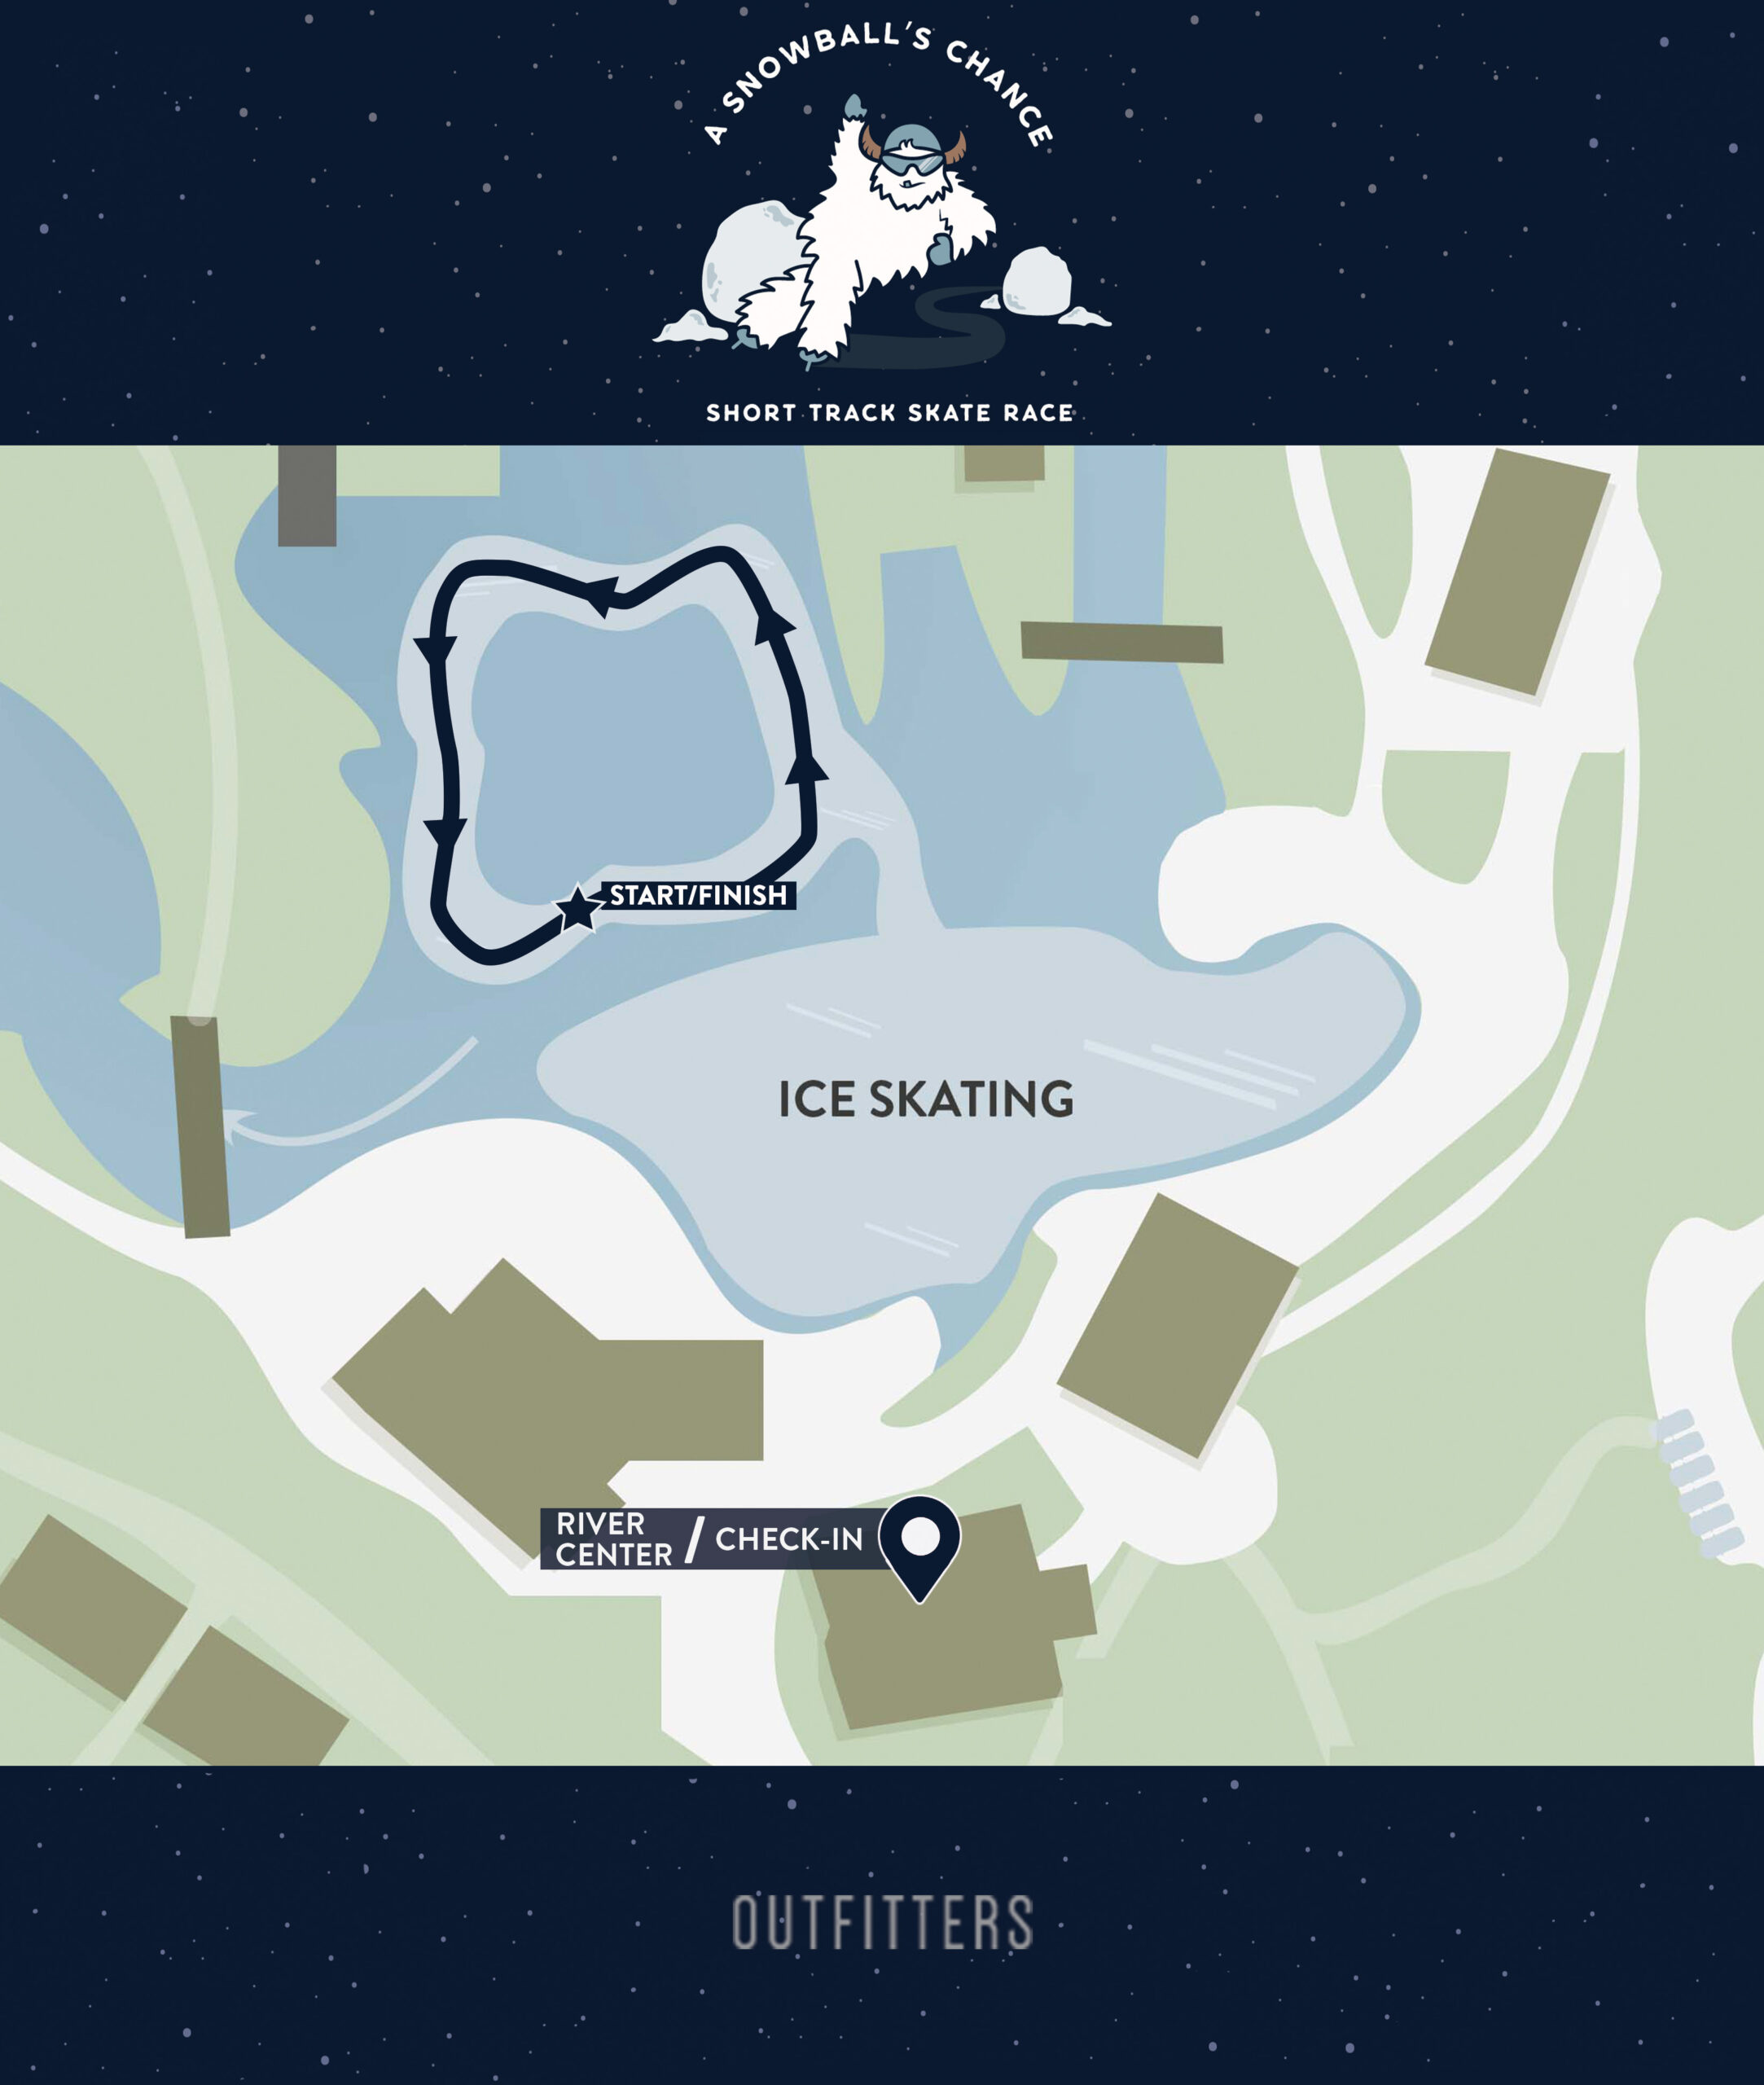 A Snowball's Chance Course Map